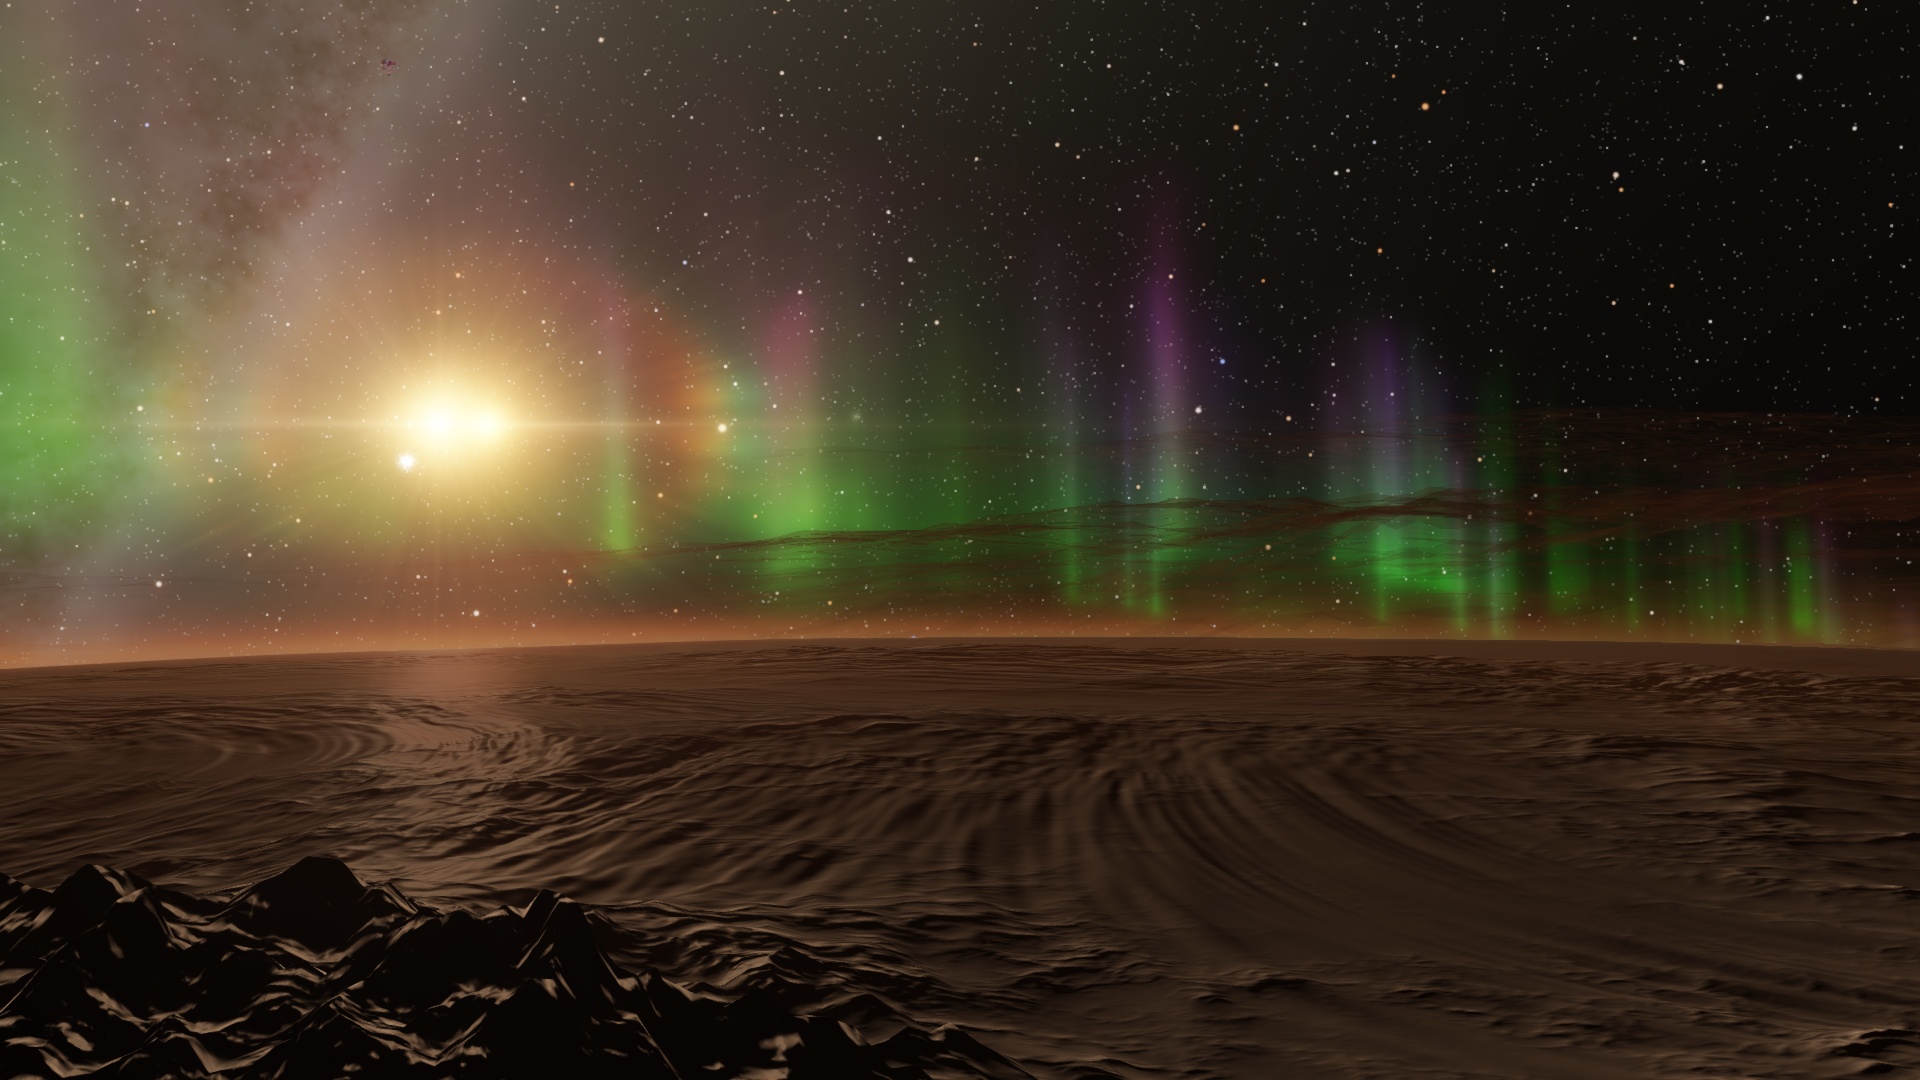 An Otherworldly View - Space Engine by titanfish1337 on DeviantArt